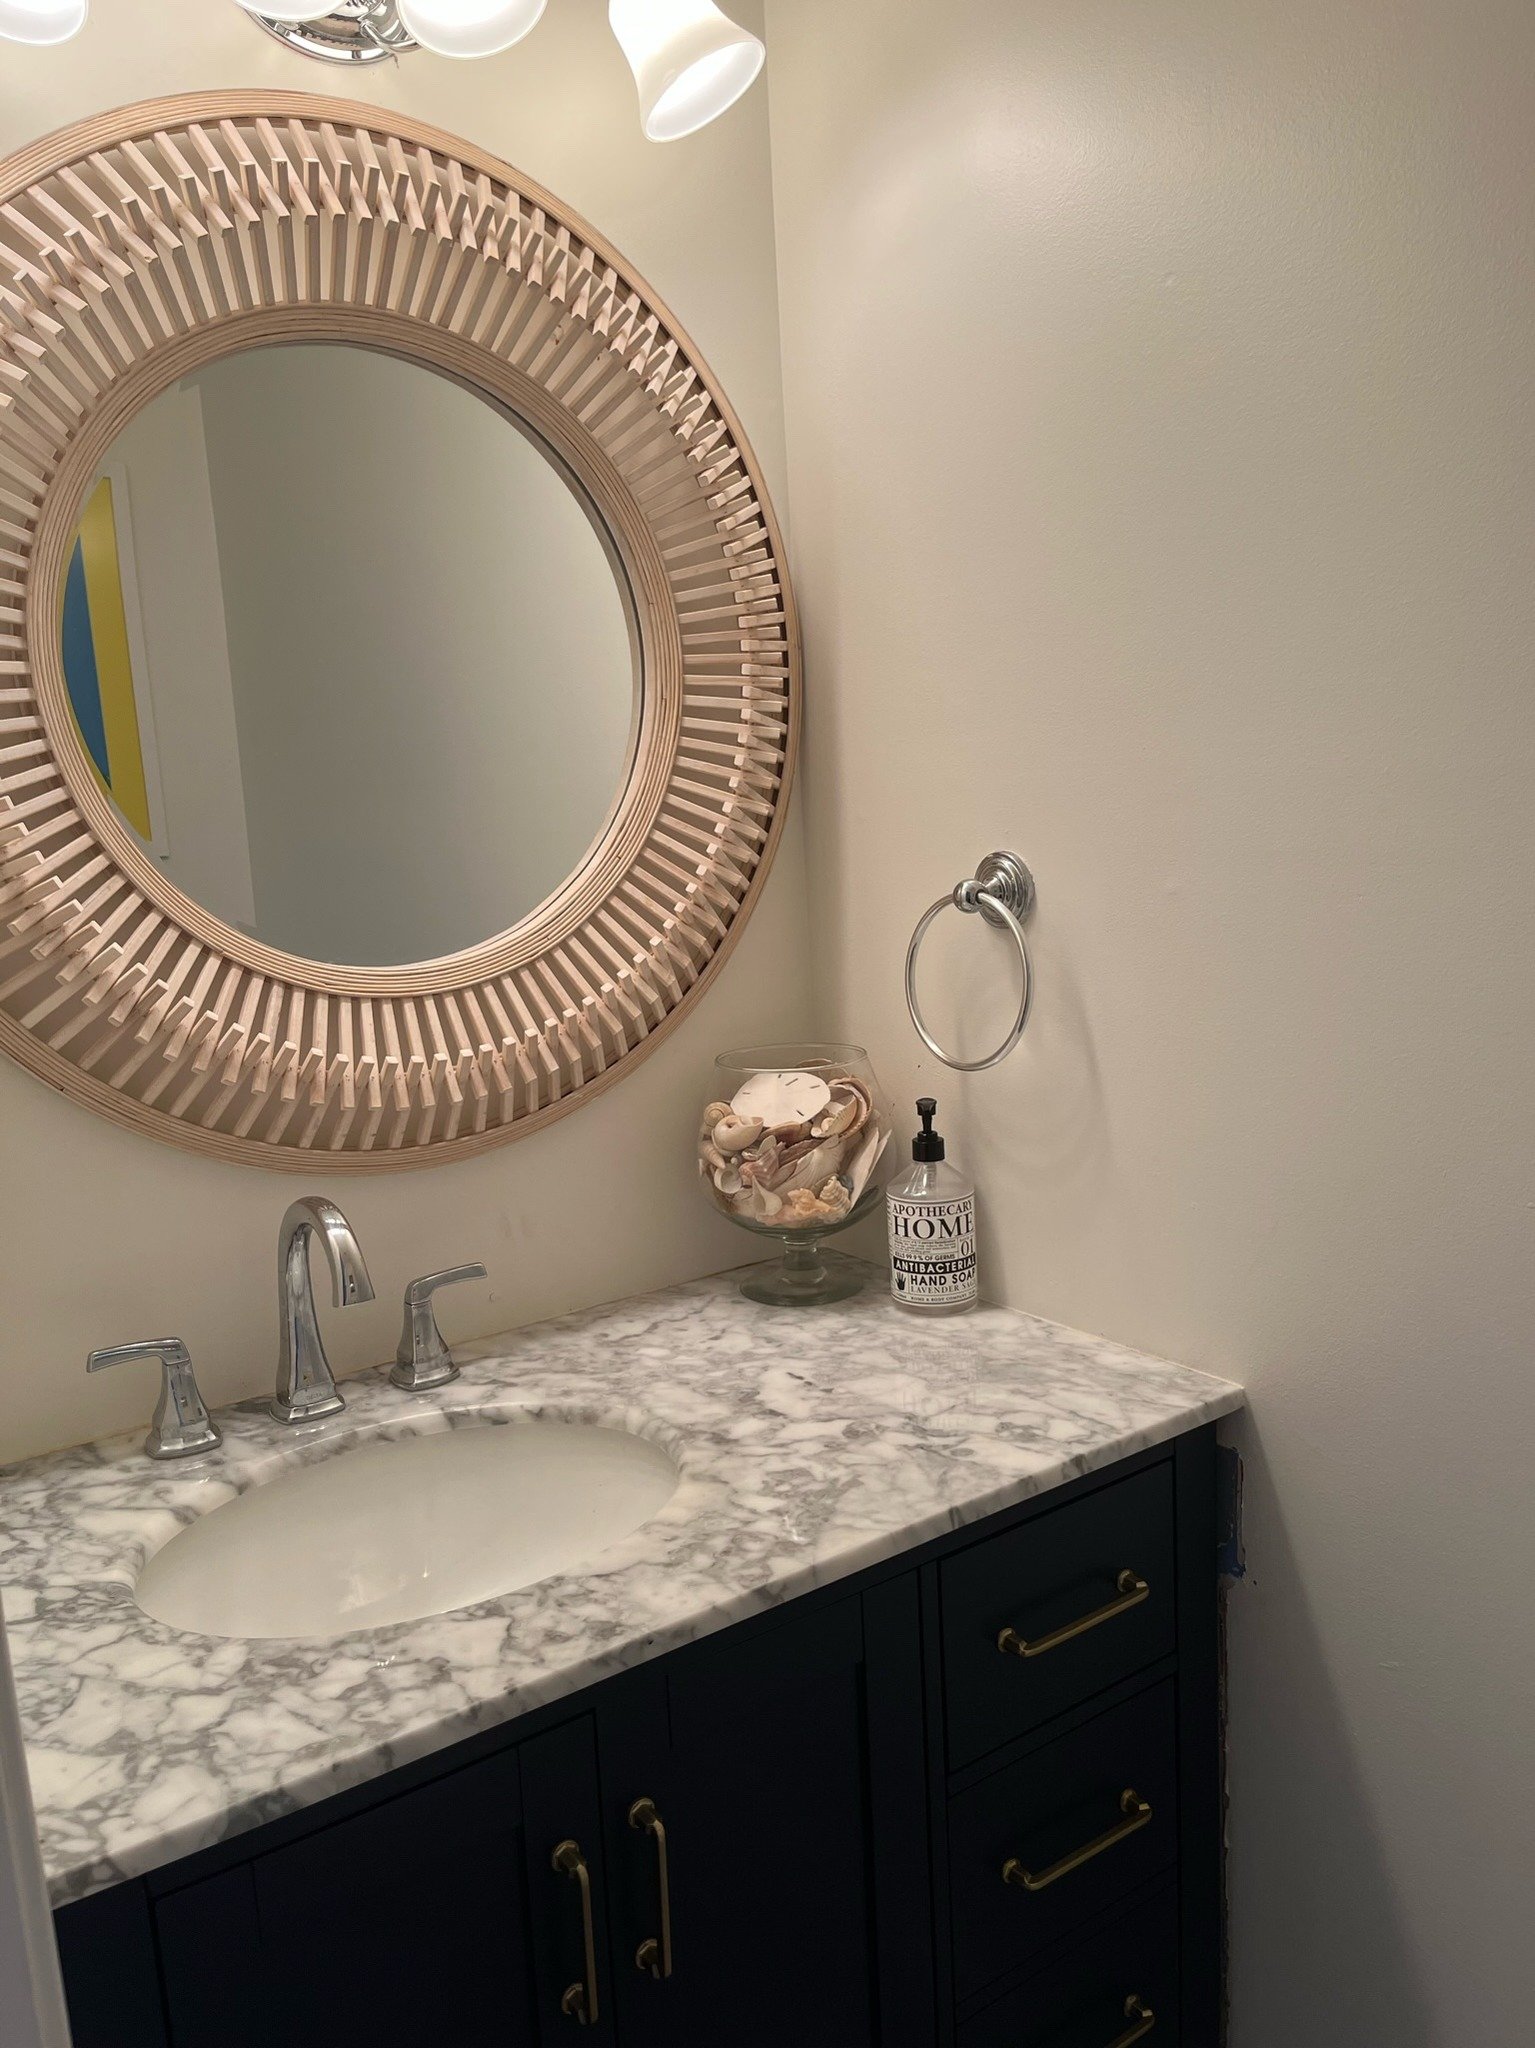 Wash away your worries in coastal bliss! Our Cape May rental bathrooms are a haven of relaxation, featuring beach-inspired decor and whimsical seashells. 🐚🚿 

Book your May getaway at CapeMayBeachHouse.com 

#capemaynj #jerseyshore #jerseyshorelife